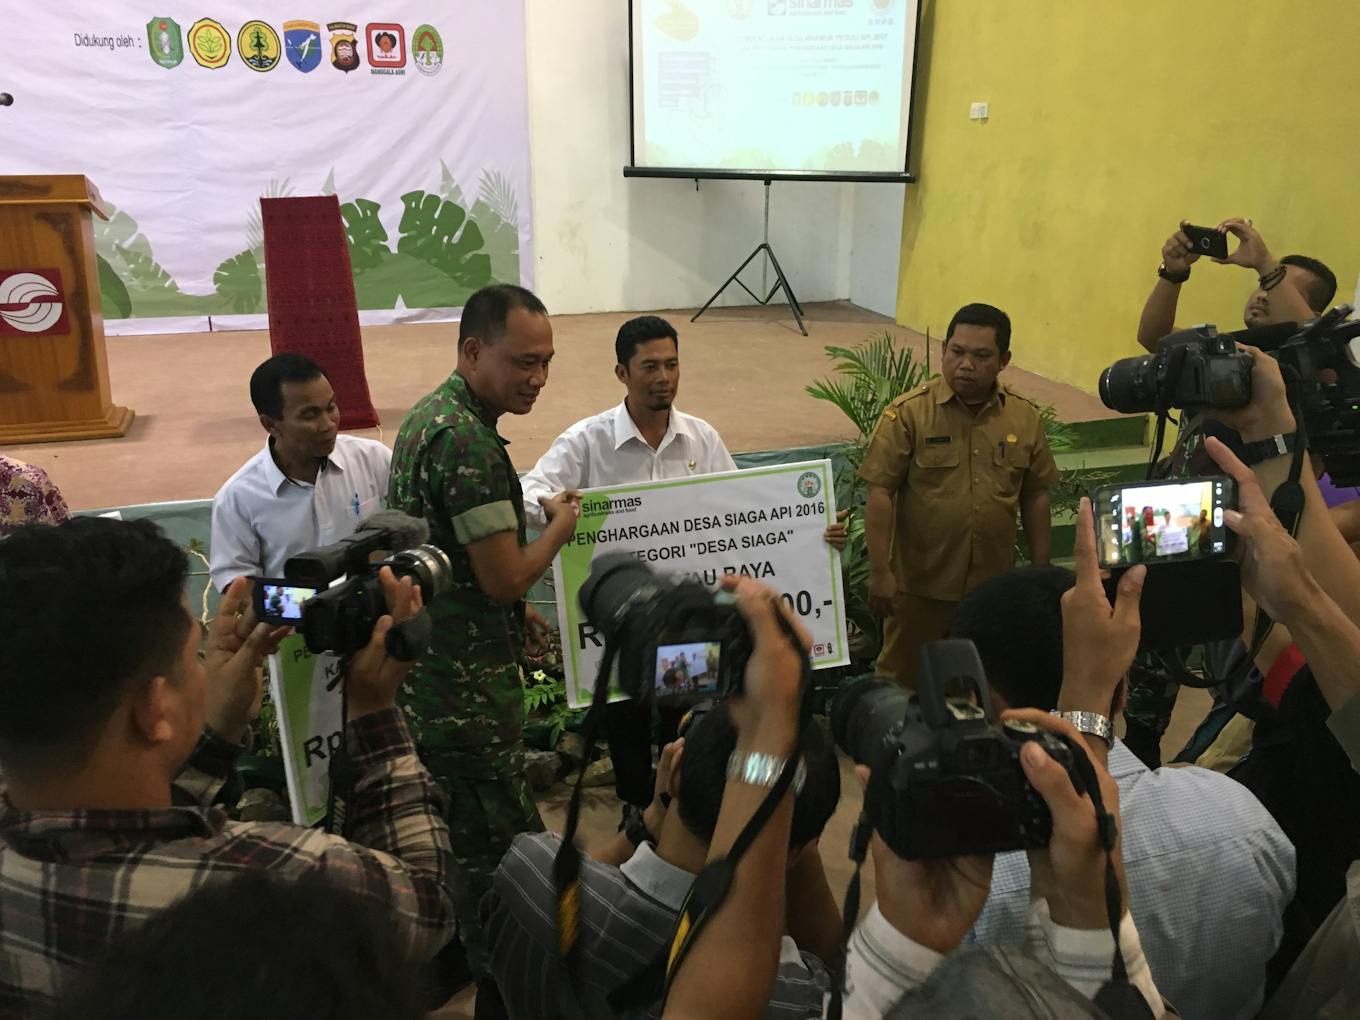 A cheque for IDR 100 million (US$7,500) is awarded to village representatives living in a GAR concession in West Kalimantan. The award is for keeping their village fire free.